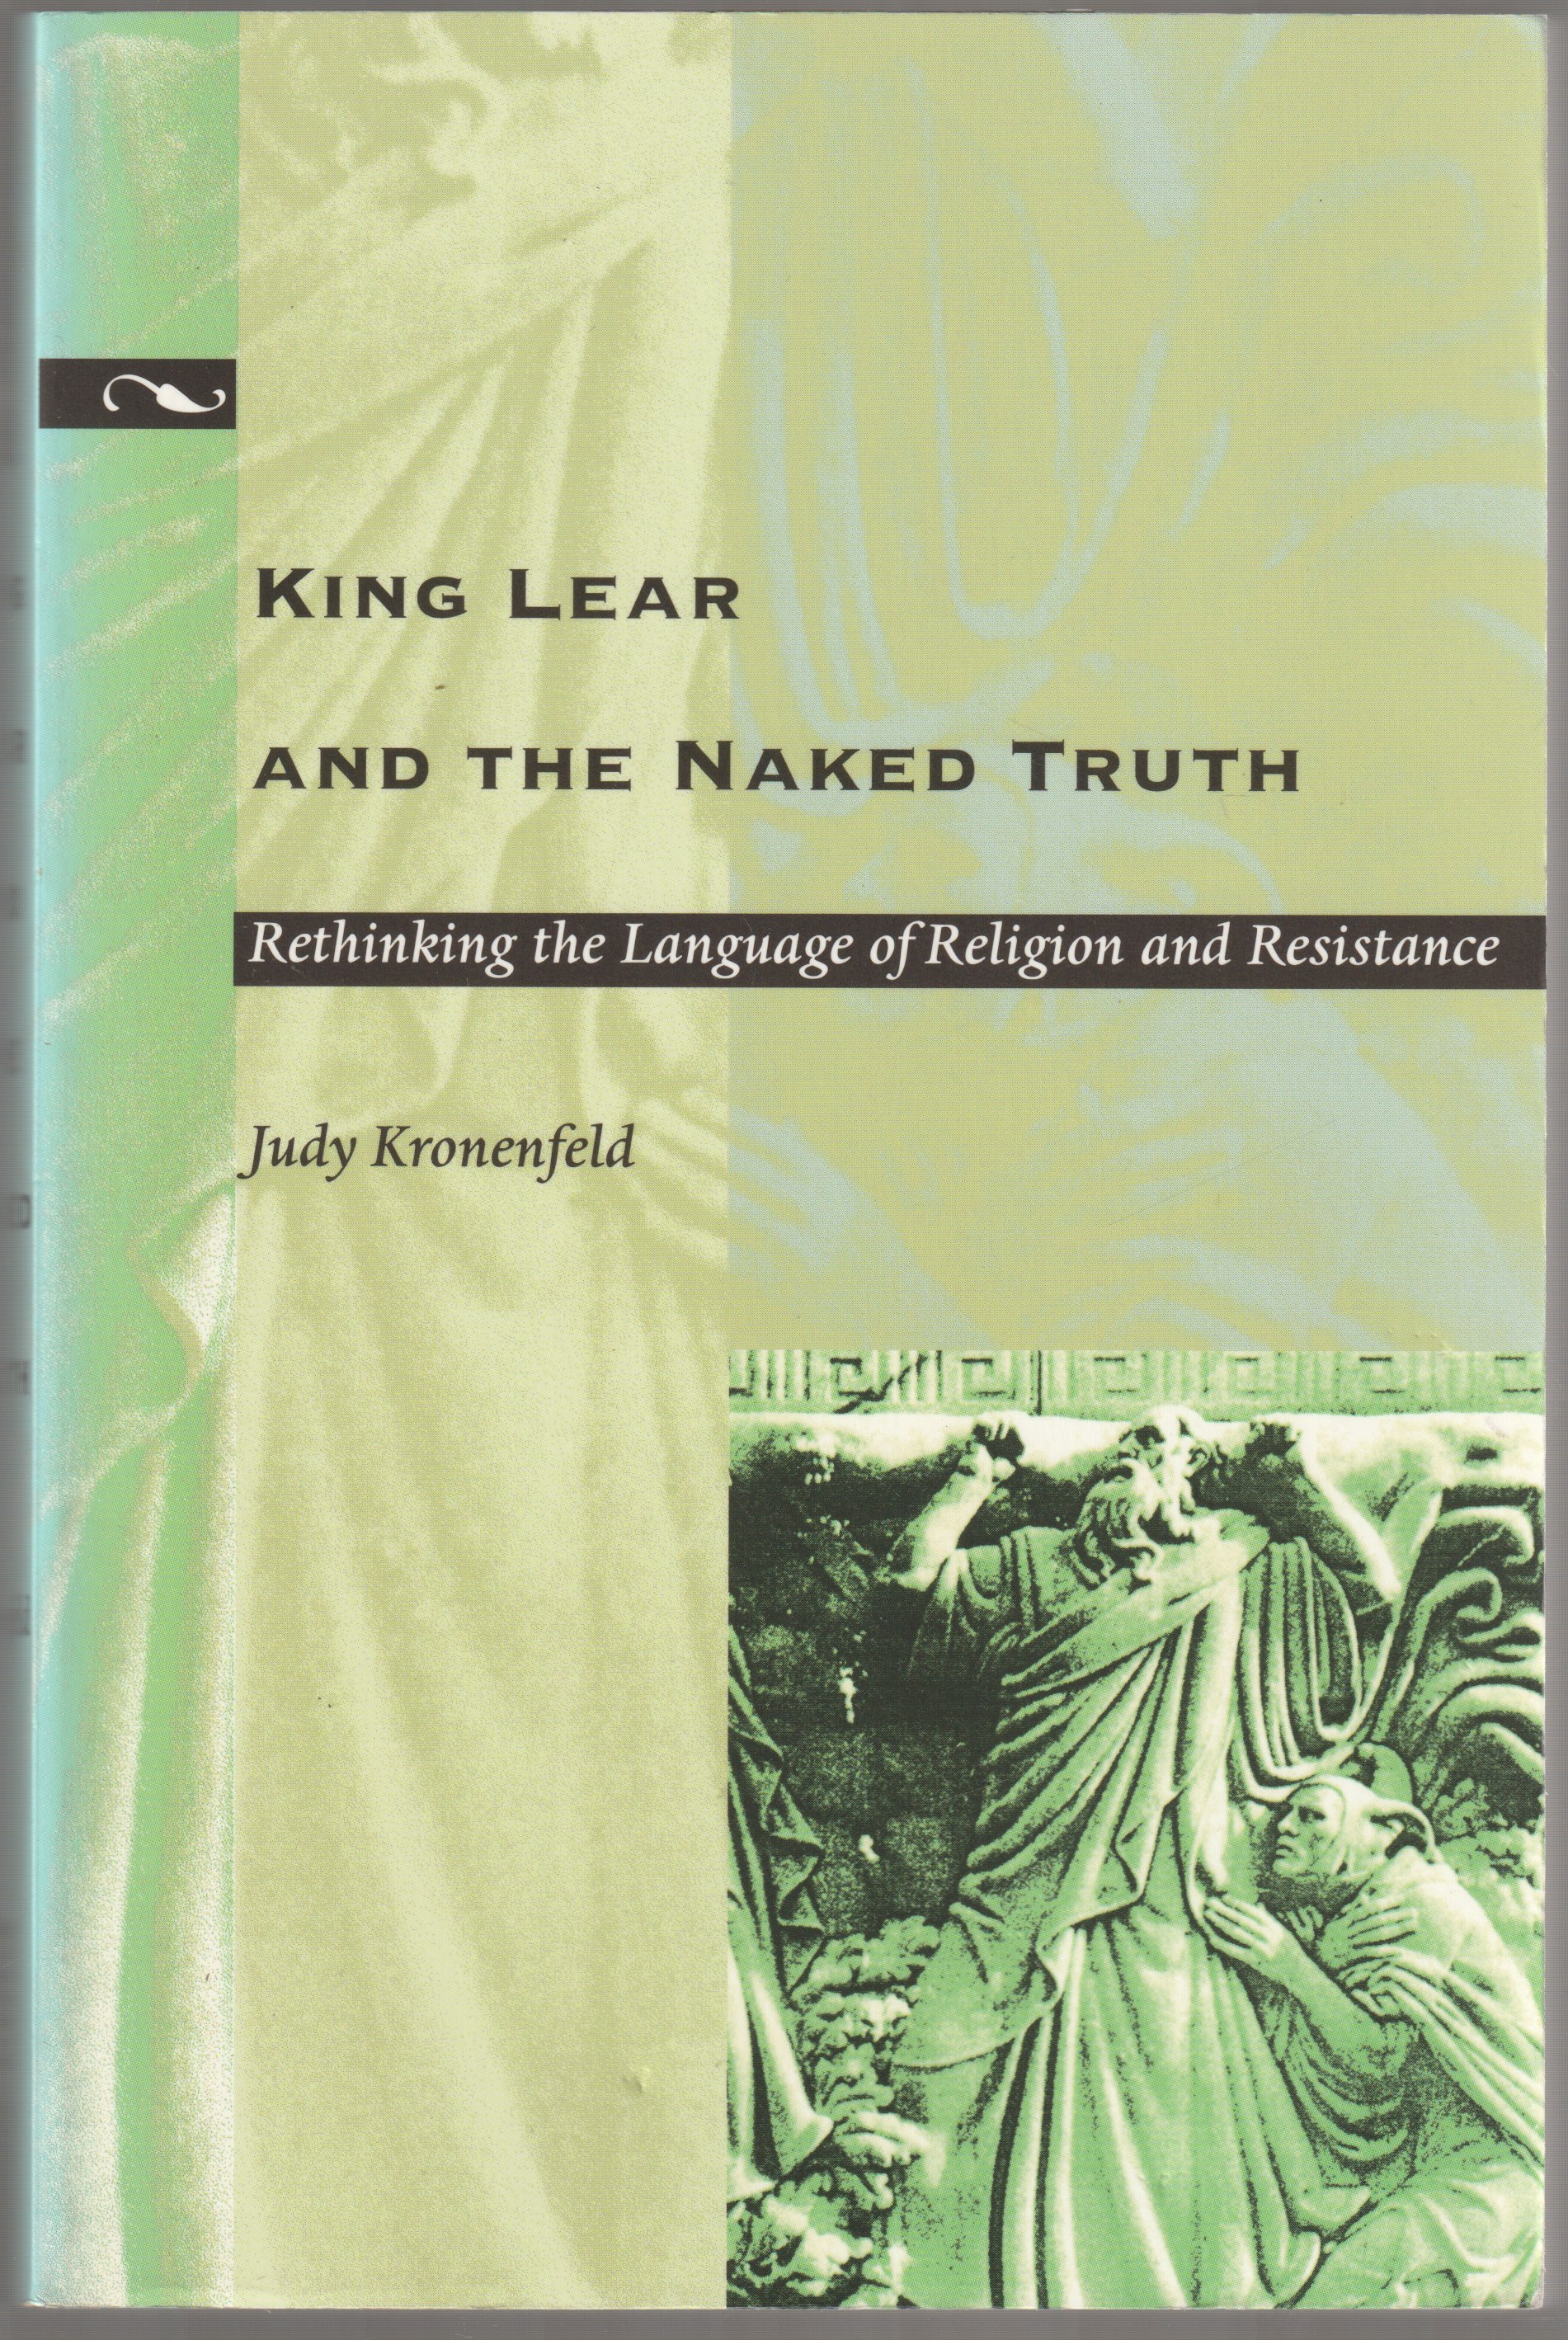 King Lear and the naked truth : rethinking the language of religion and resistance.